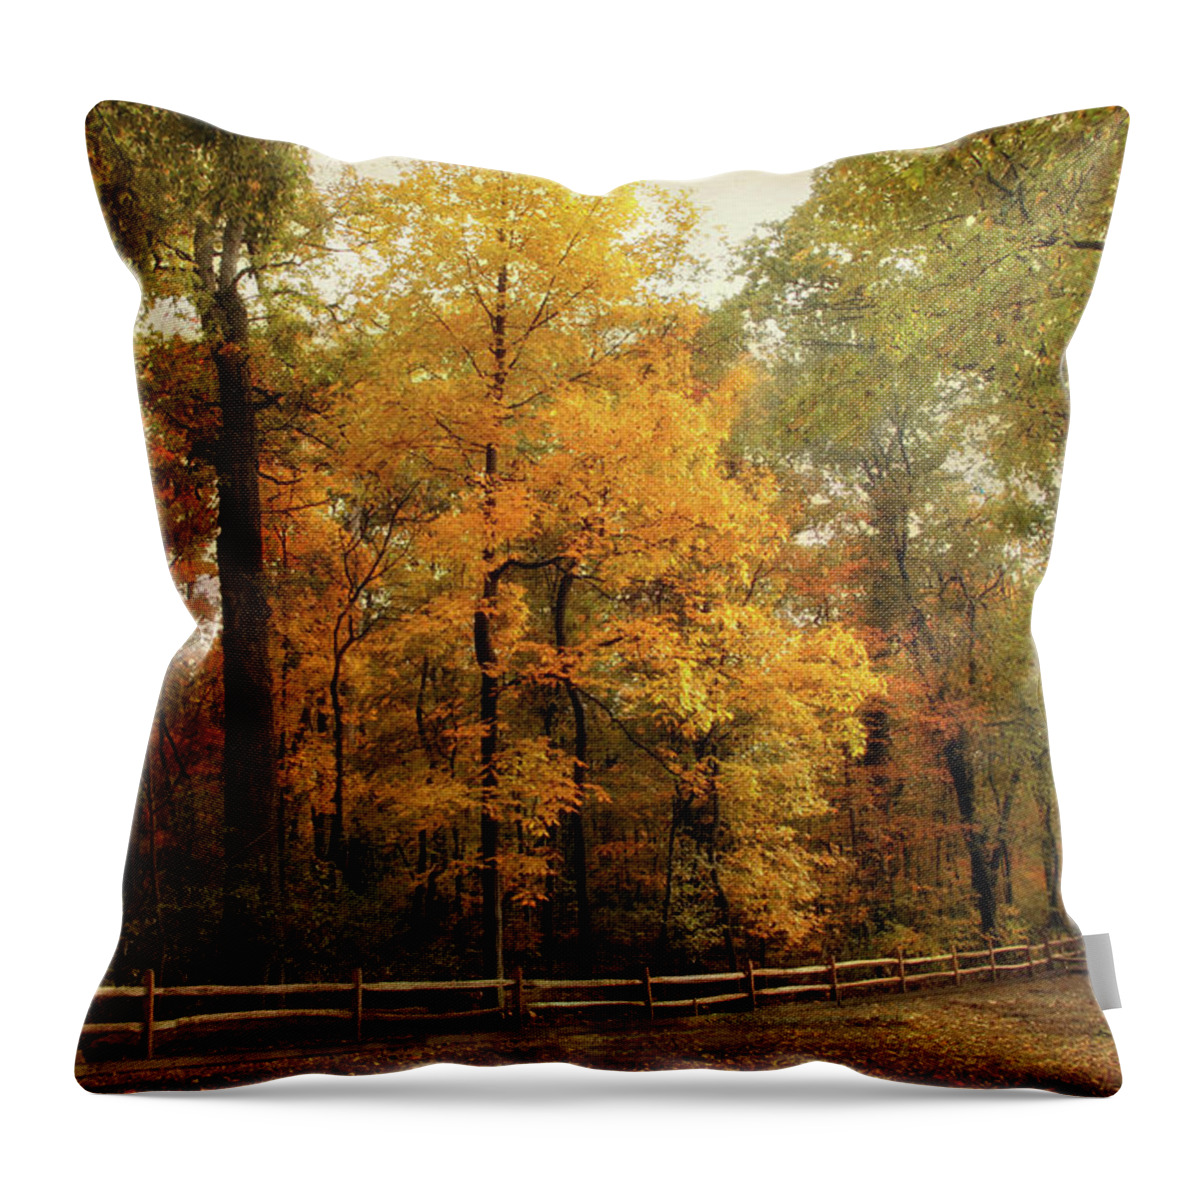 Autumn Throw Pillow featuring the photograph Thain Forest Autumn Trail by Jessica Jenney